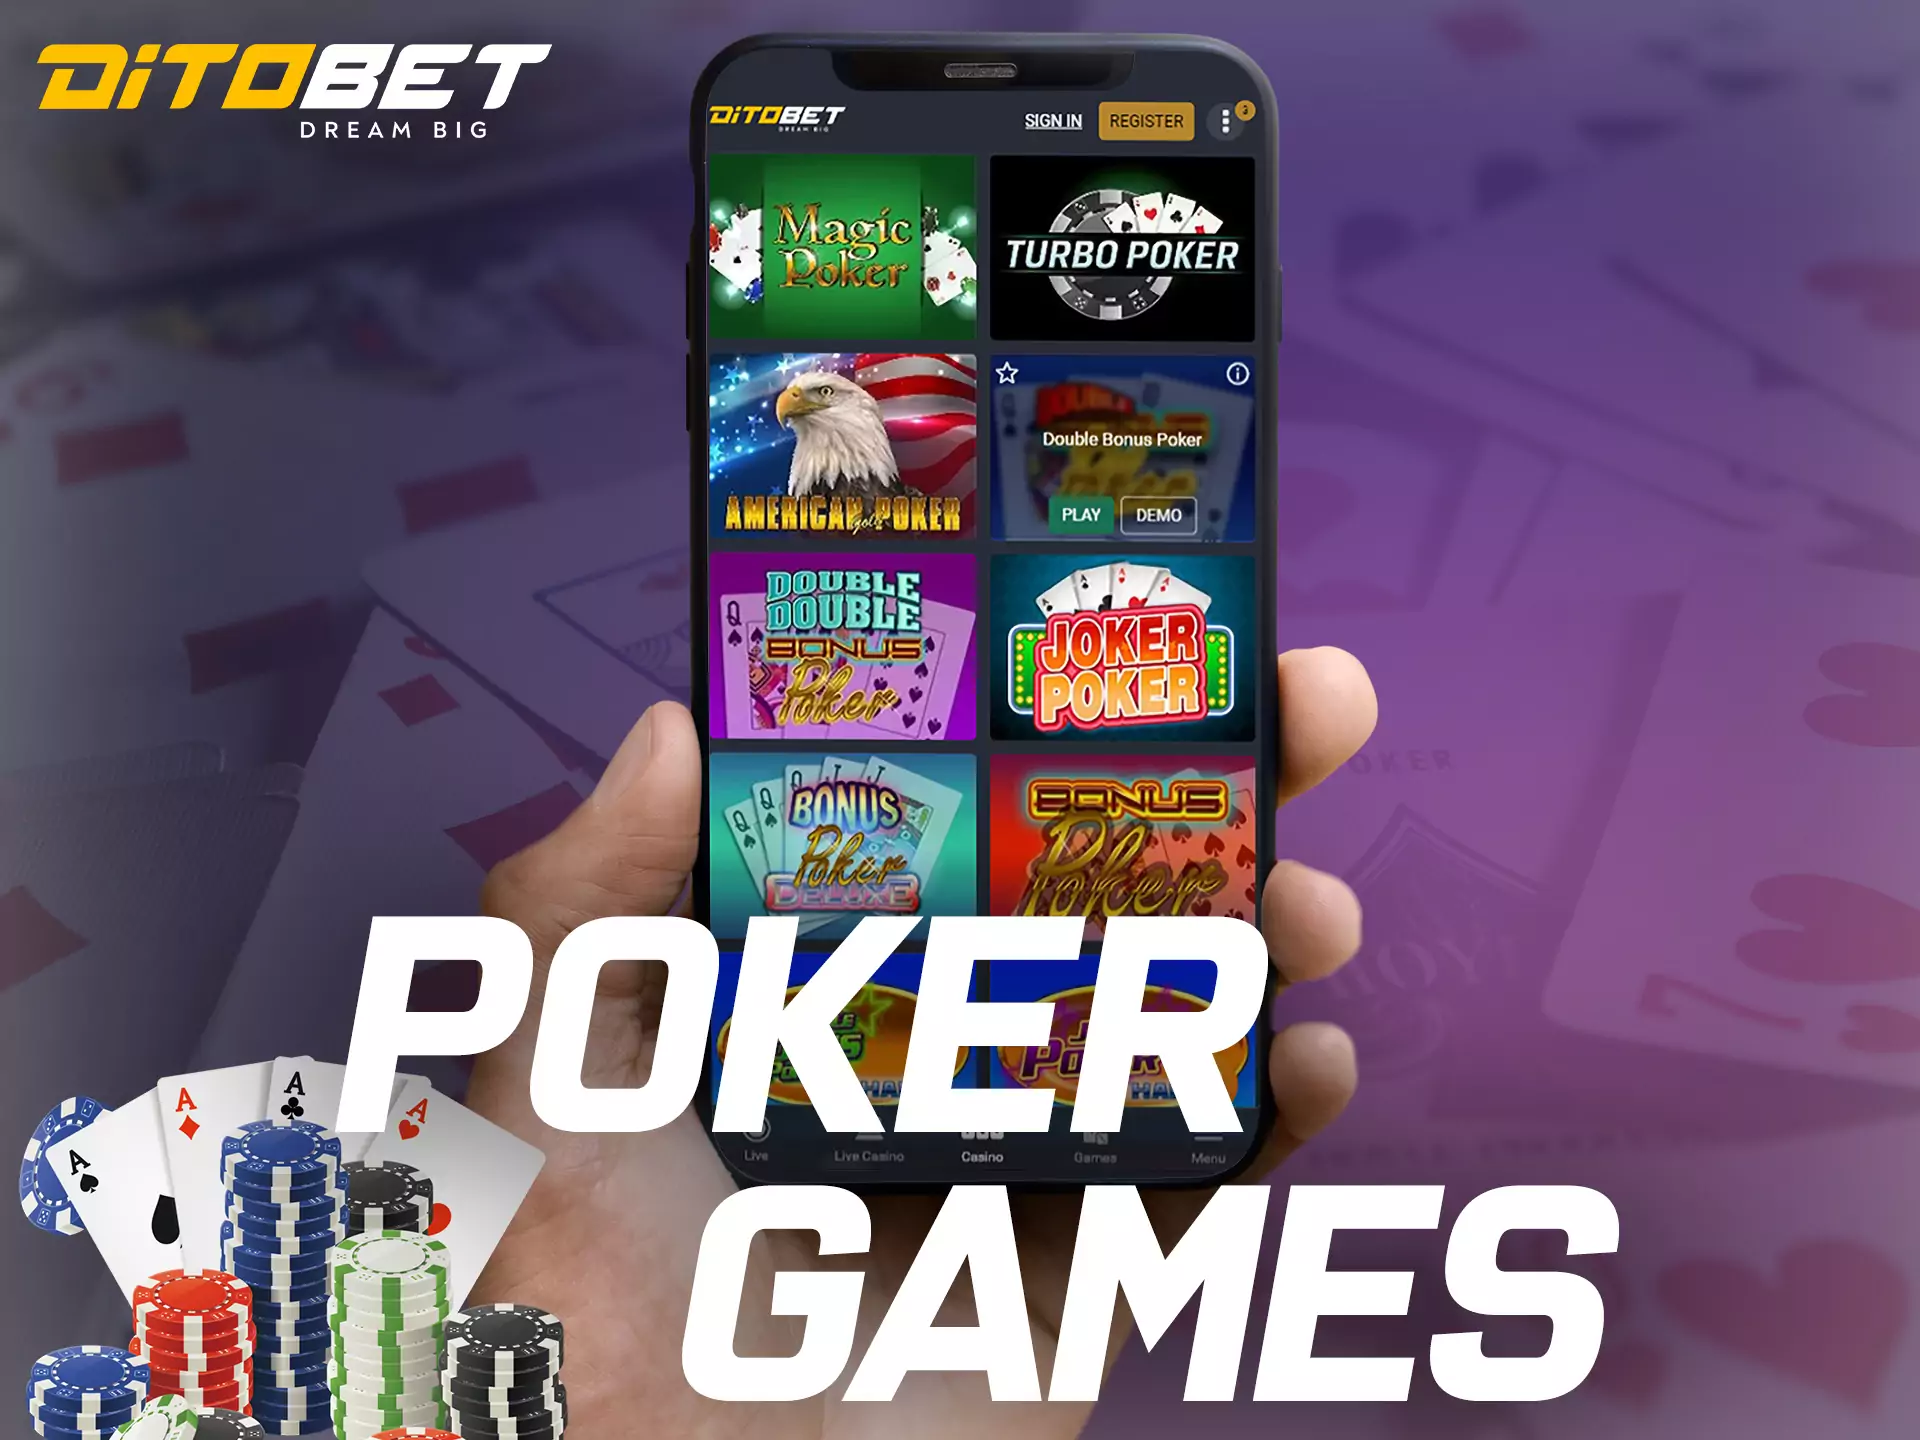 Play poker with pleasure at Ditobet Casino.